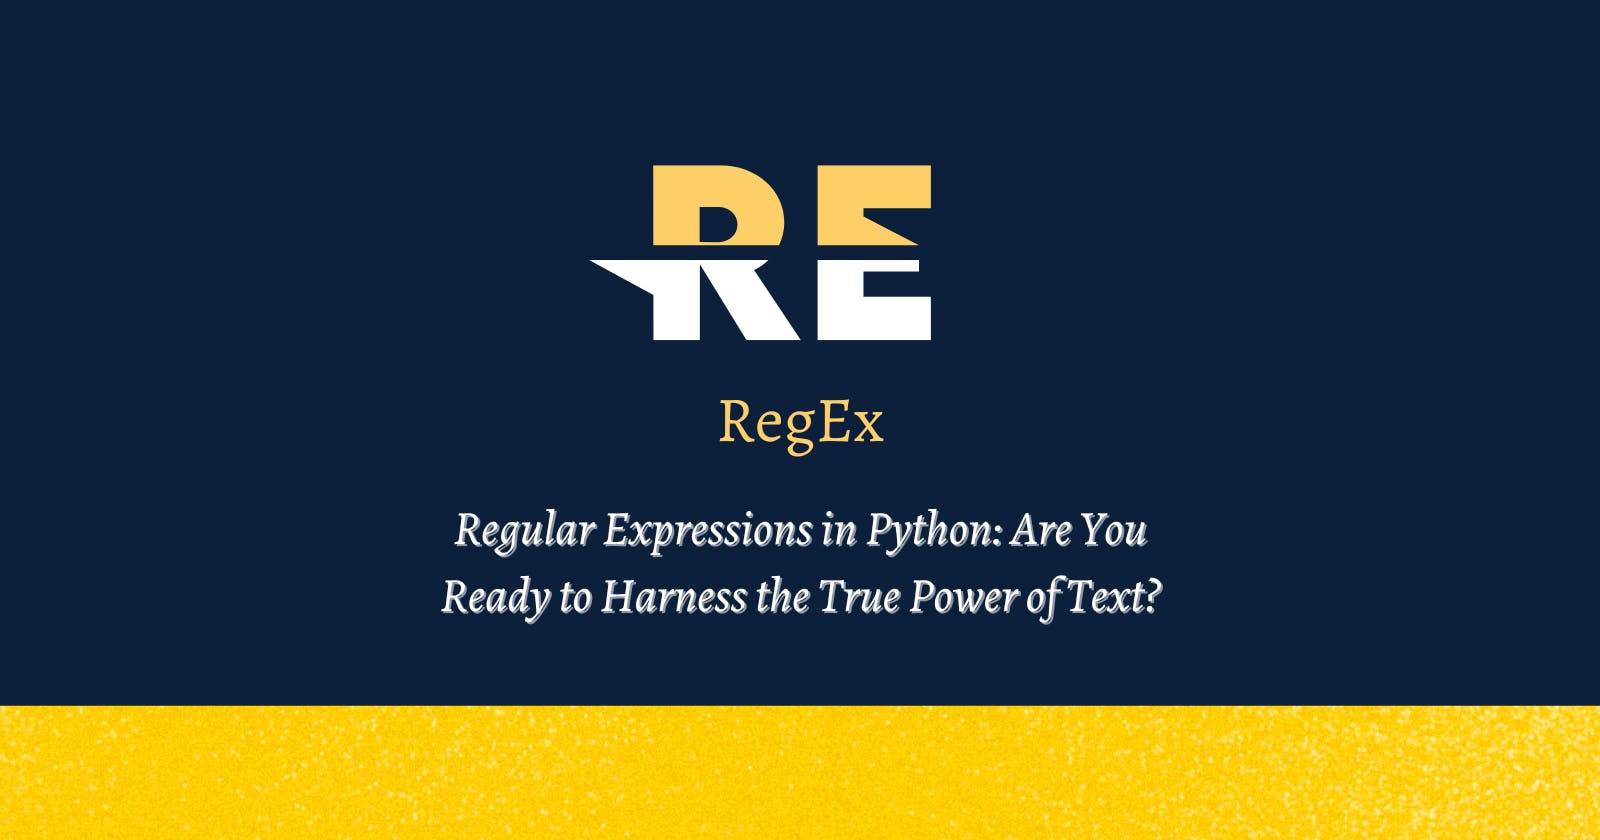 "Decoding the Magic of RegEx: Why and How to Harness the True Power of Regular Expressions in Python for Text Manipulation"